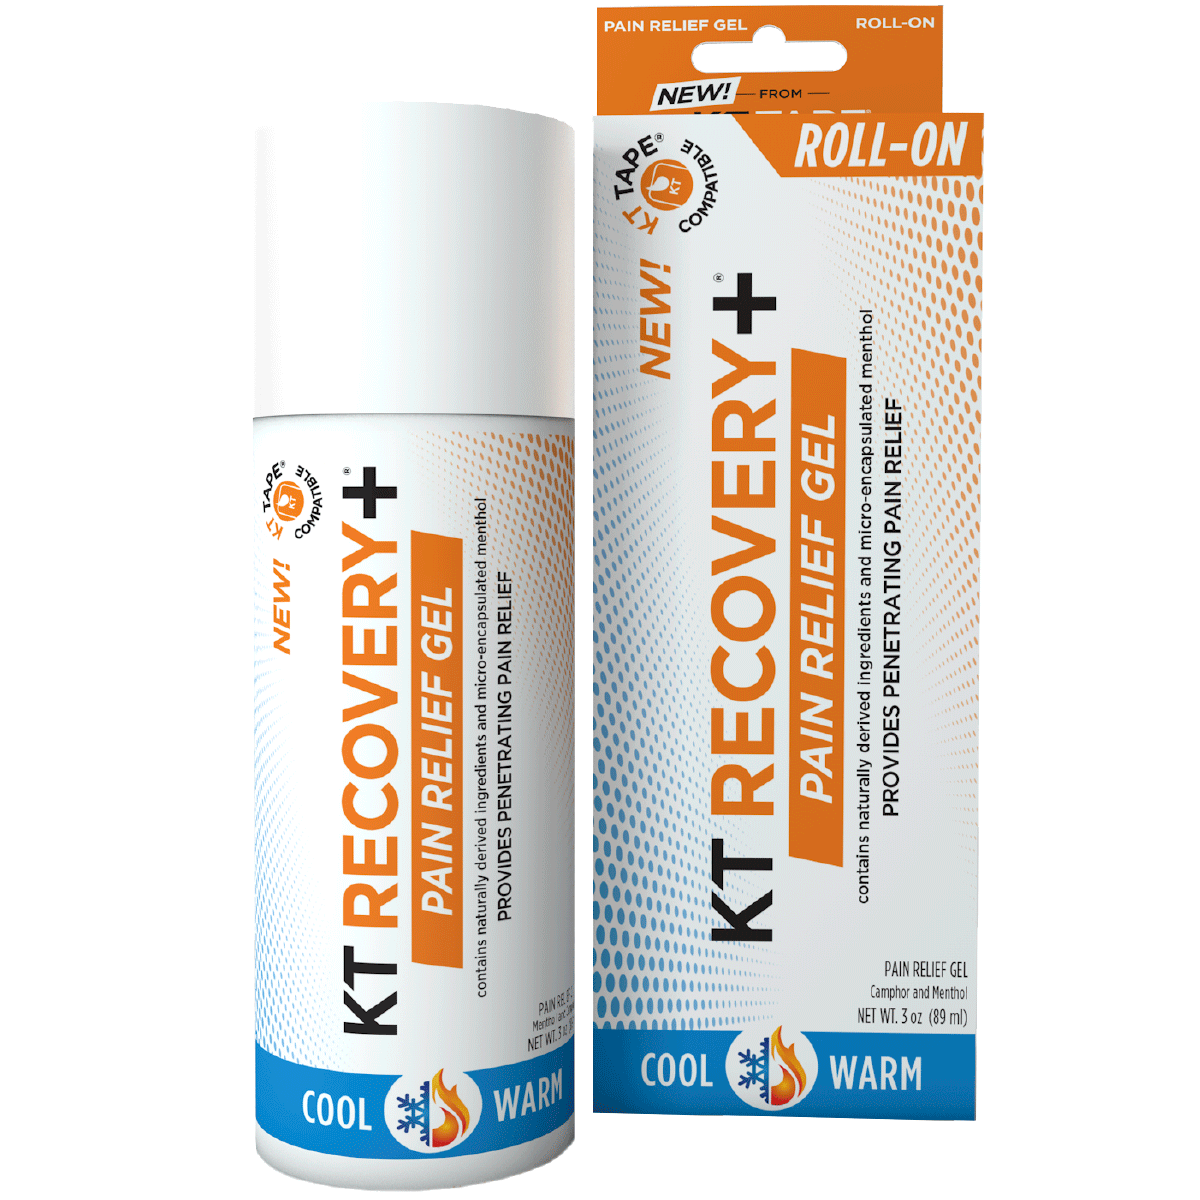 Kerri’s KT Recovery Extreme Bundle